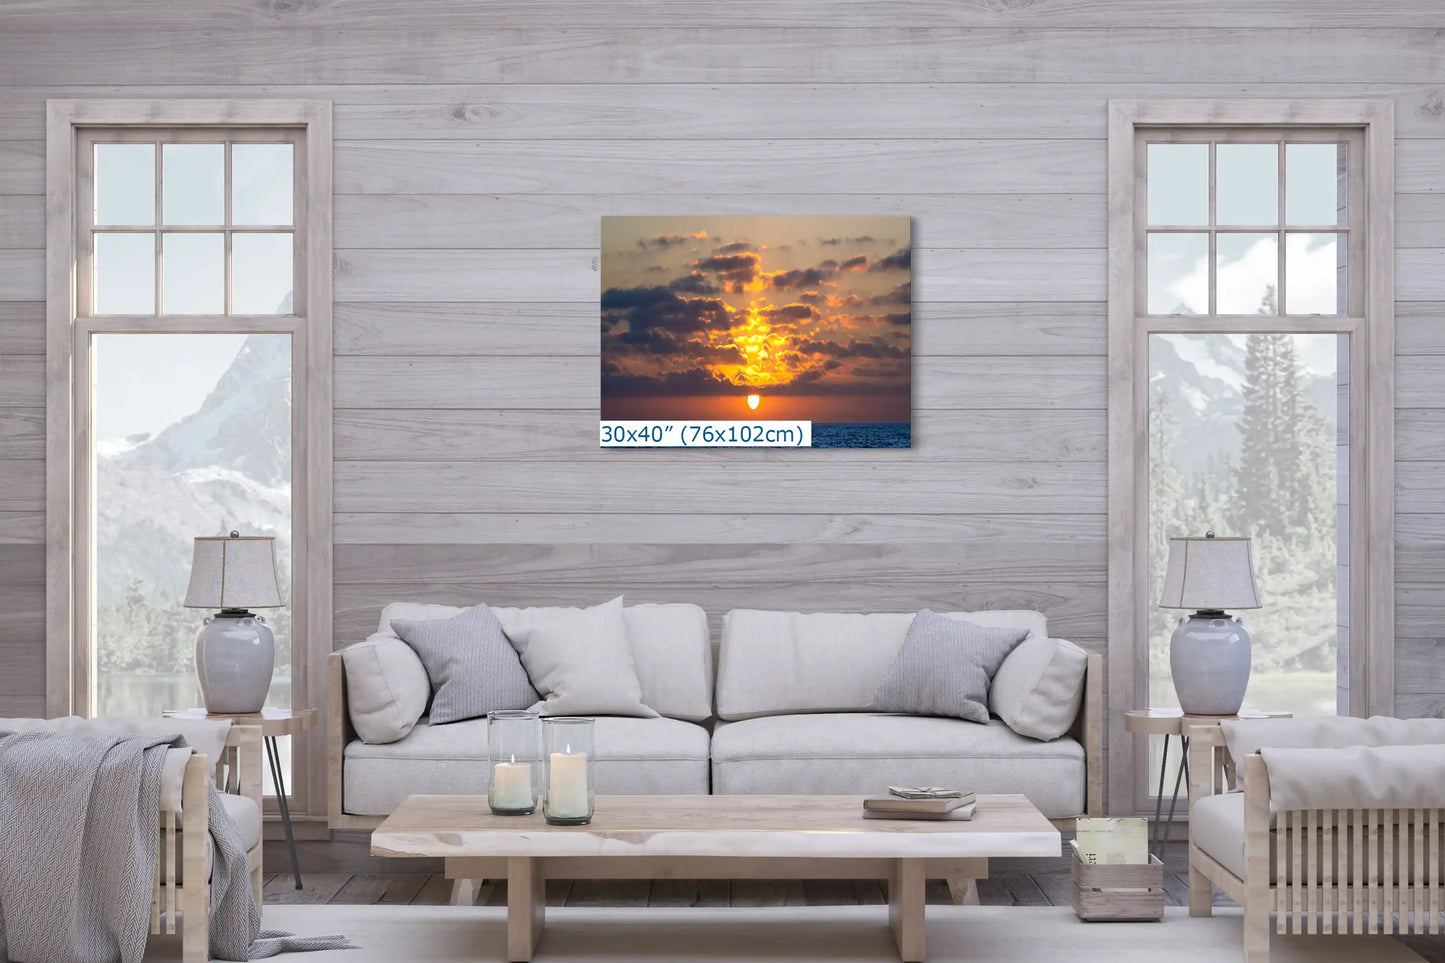 Spacious living room showcasing a large 30x40 inch canvas print of a spectacular ocean sunset scene.